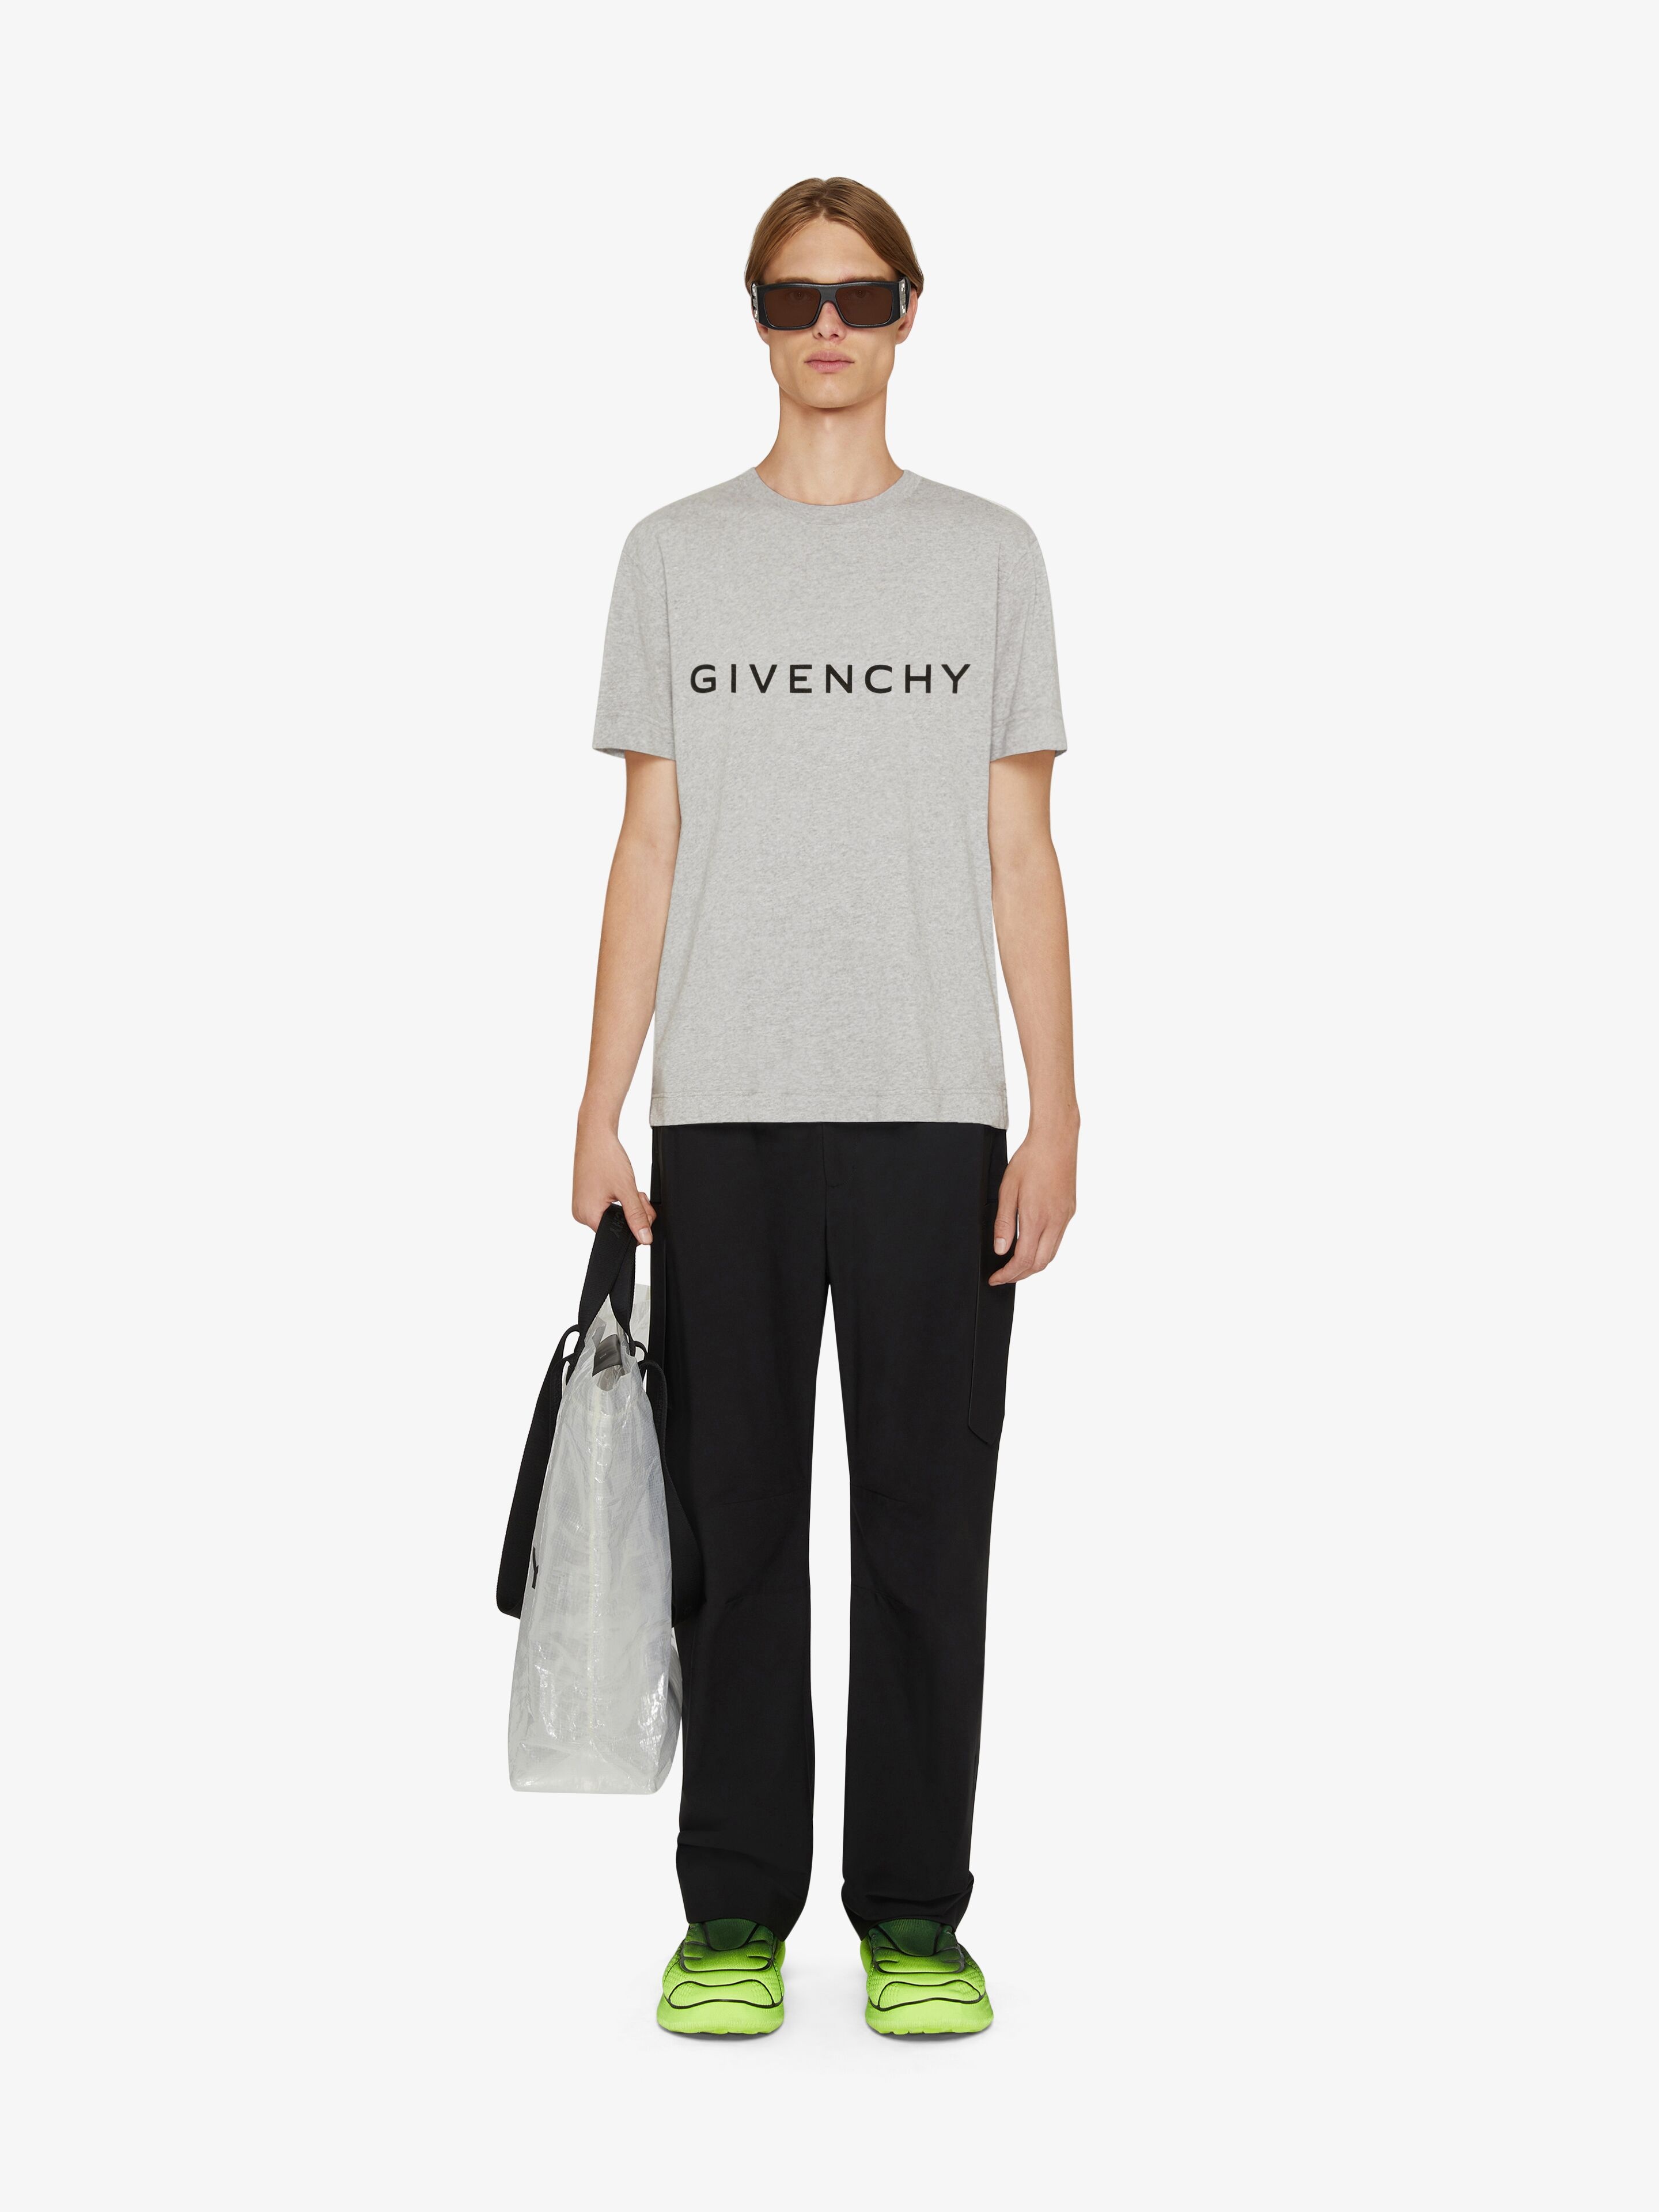 GIVENCHY ARCHETYPE SLIM FIT T-SHIRT IN COTTON - 2